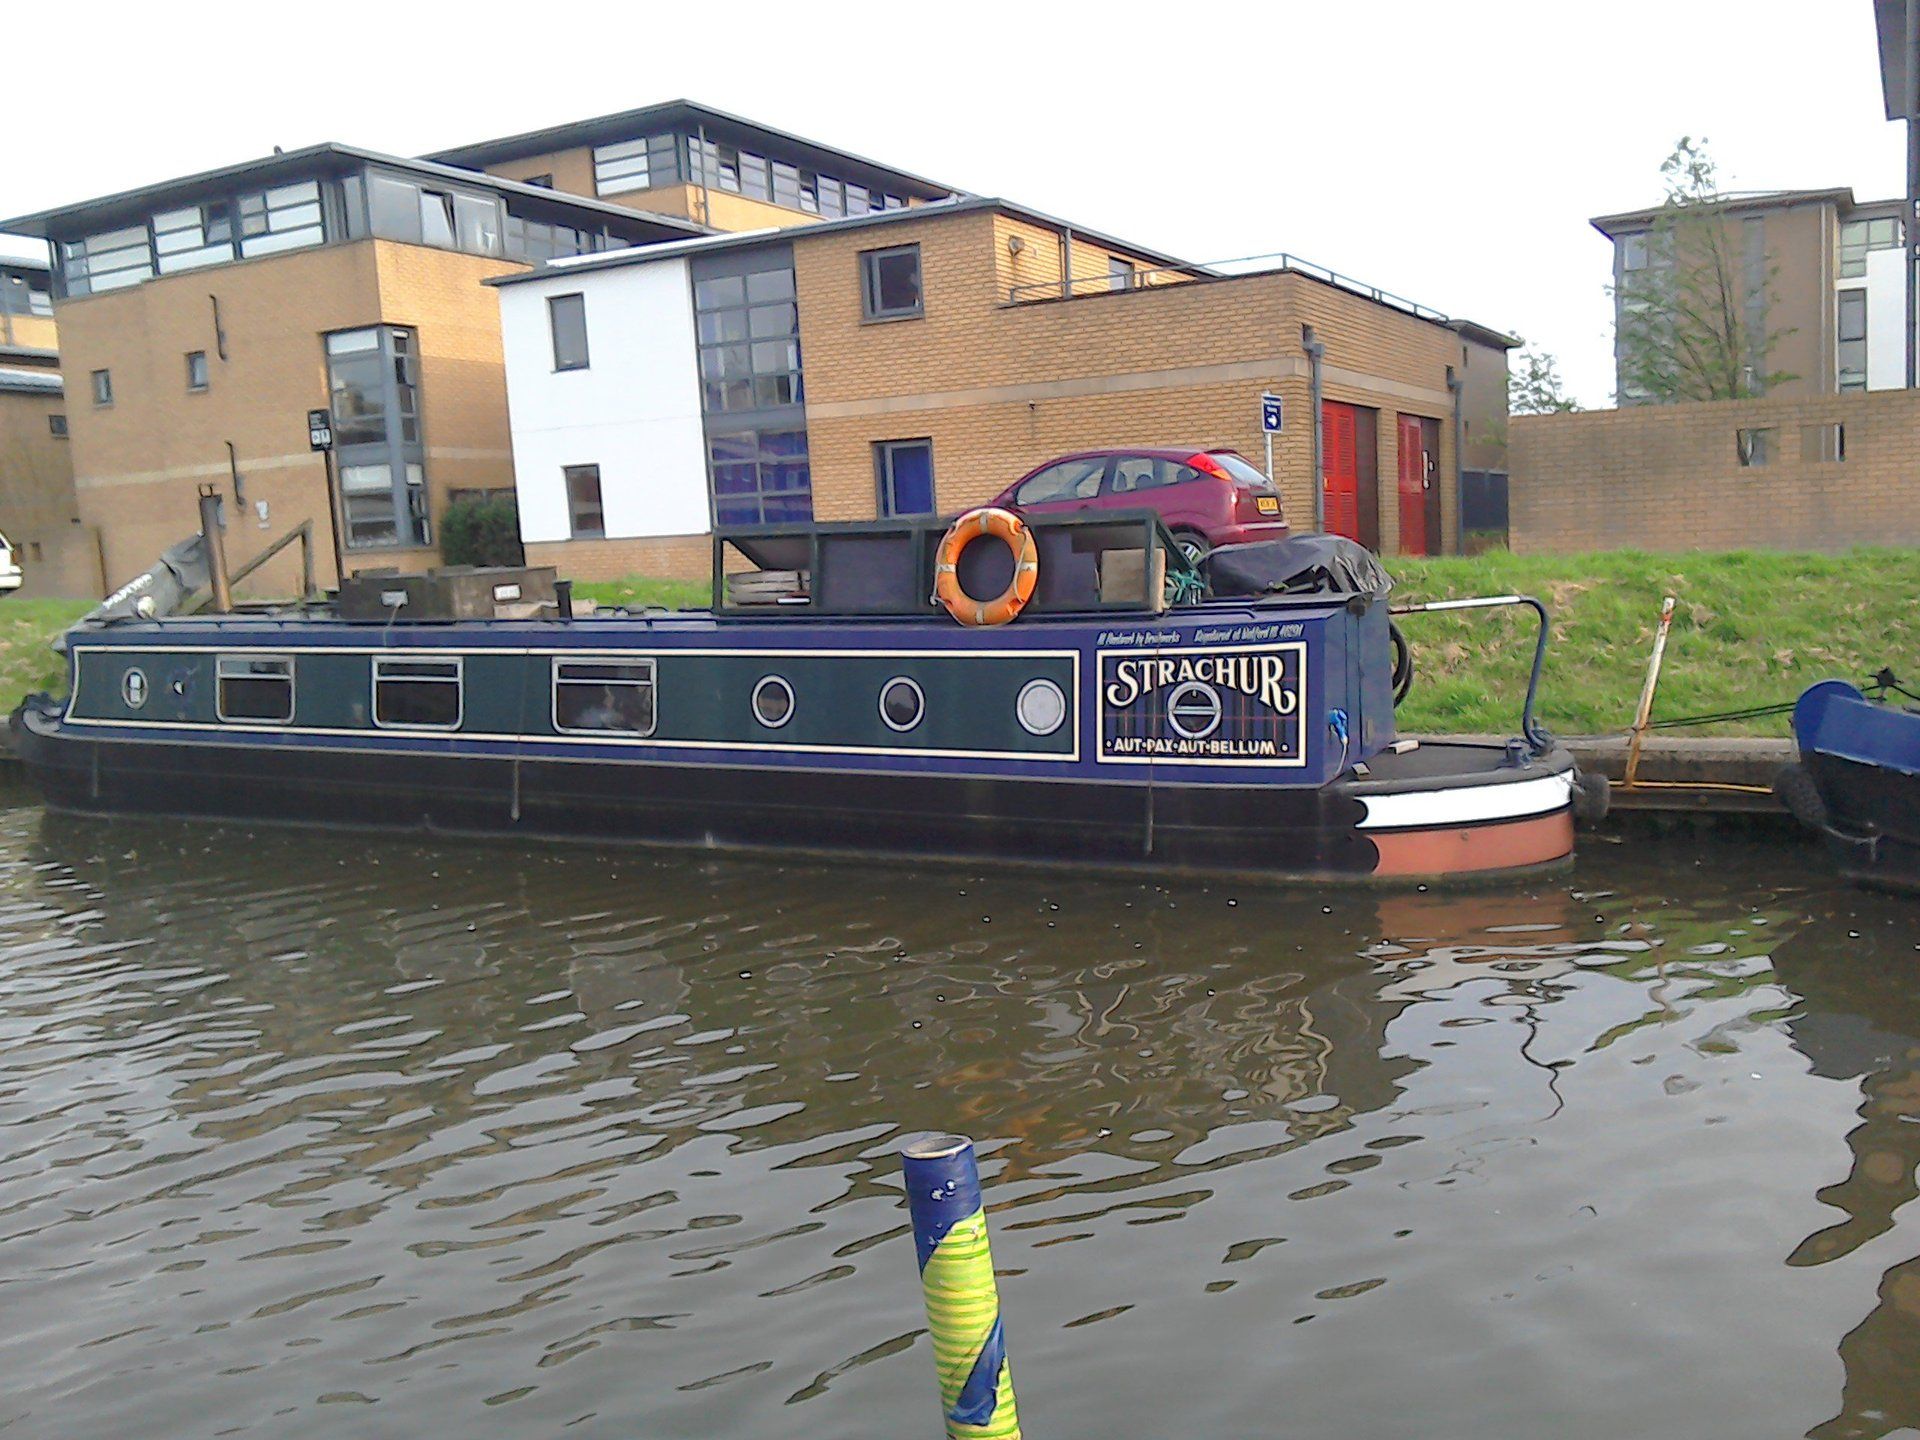 oliver boat trips lincoln